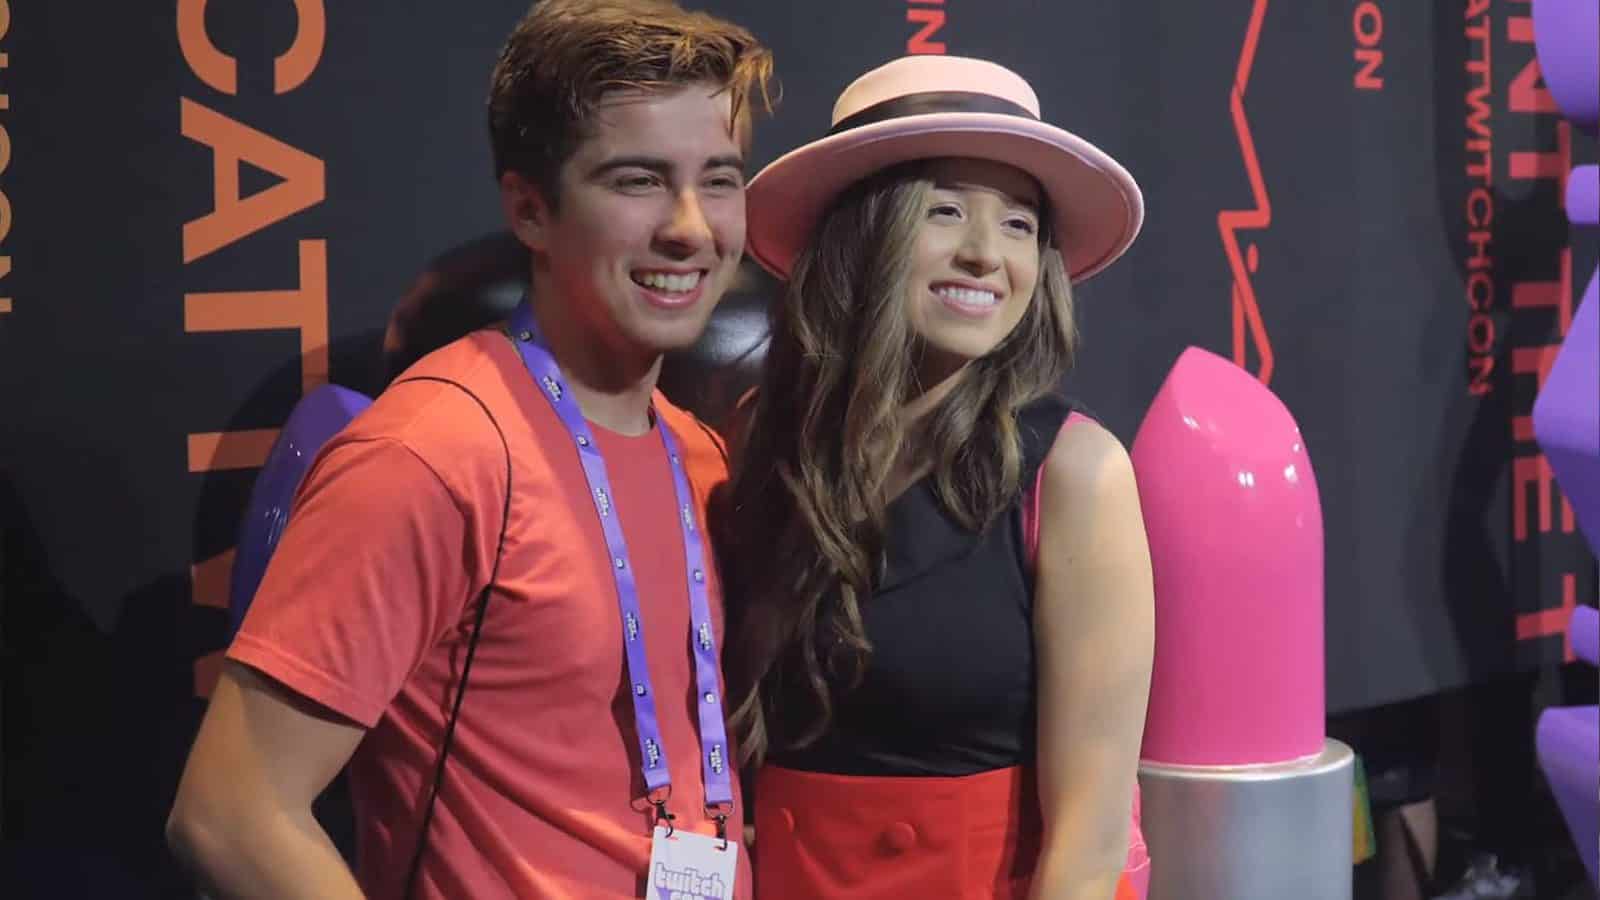 Pokimane-gives-humorous-response-to-fan-asking-her-out-at-twitchcon